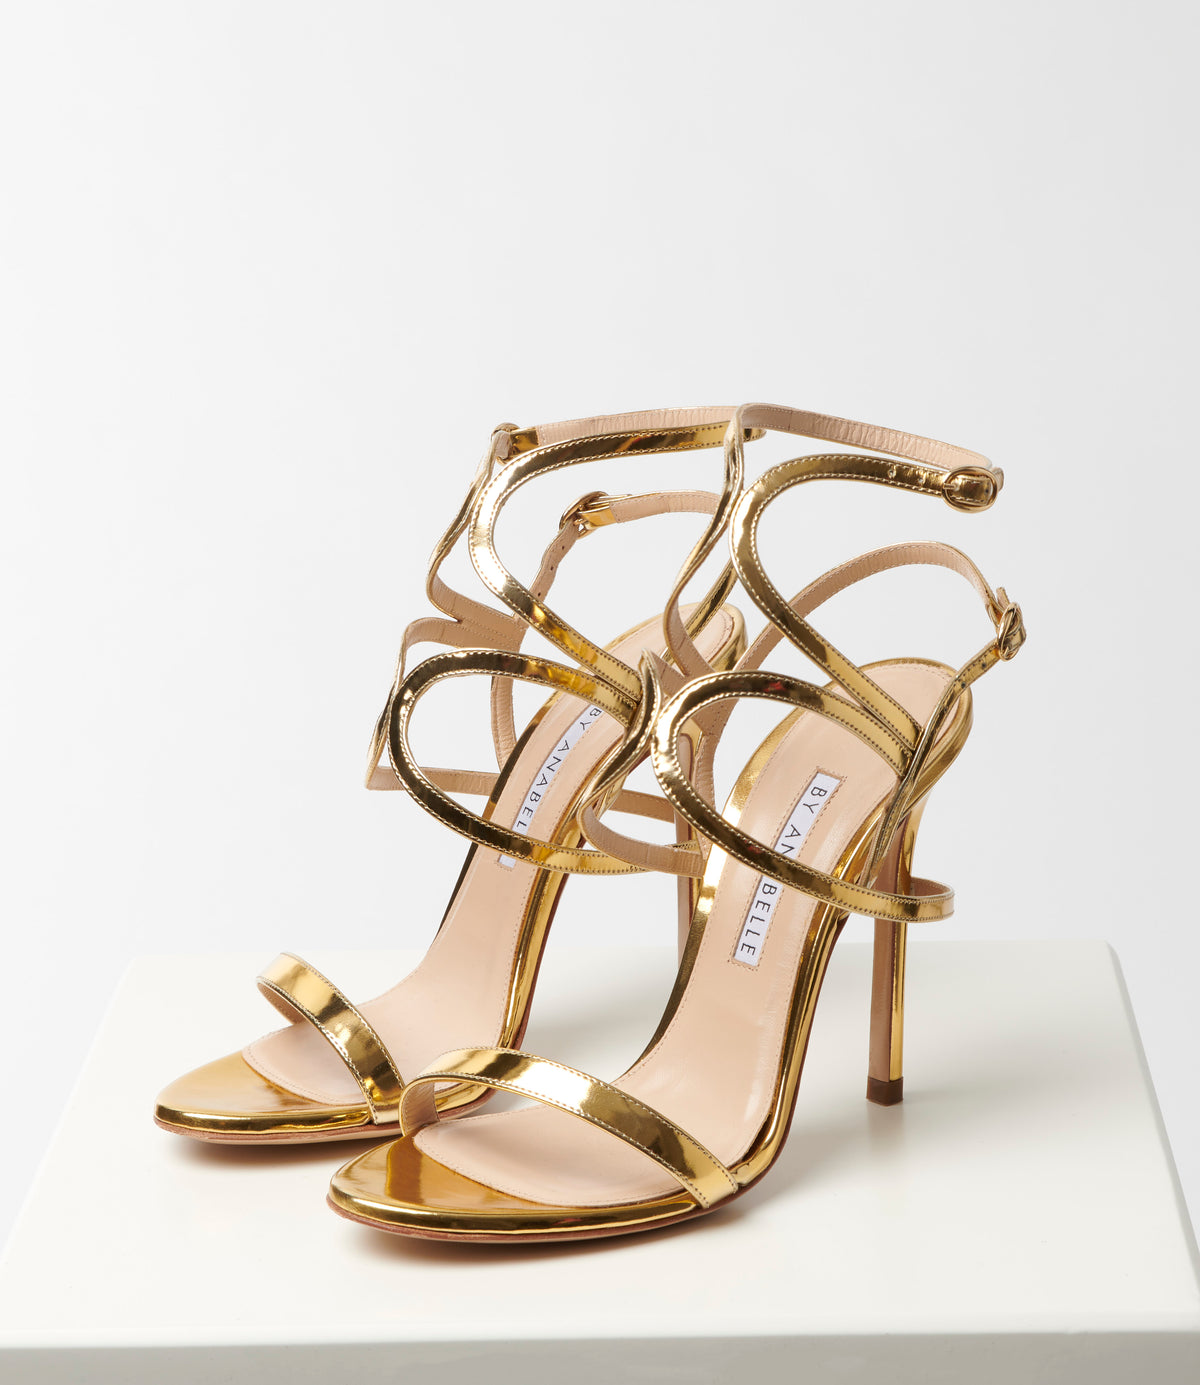 by Anabelle - Schuhe aus Leder  gold